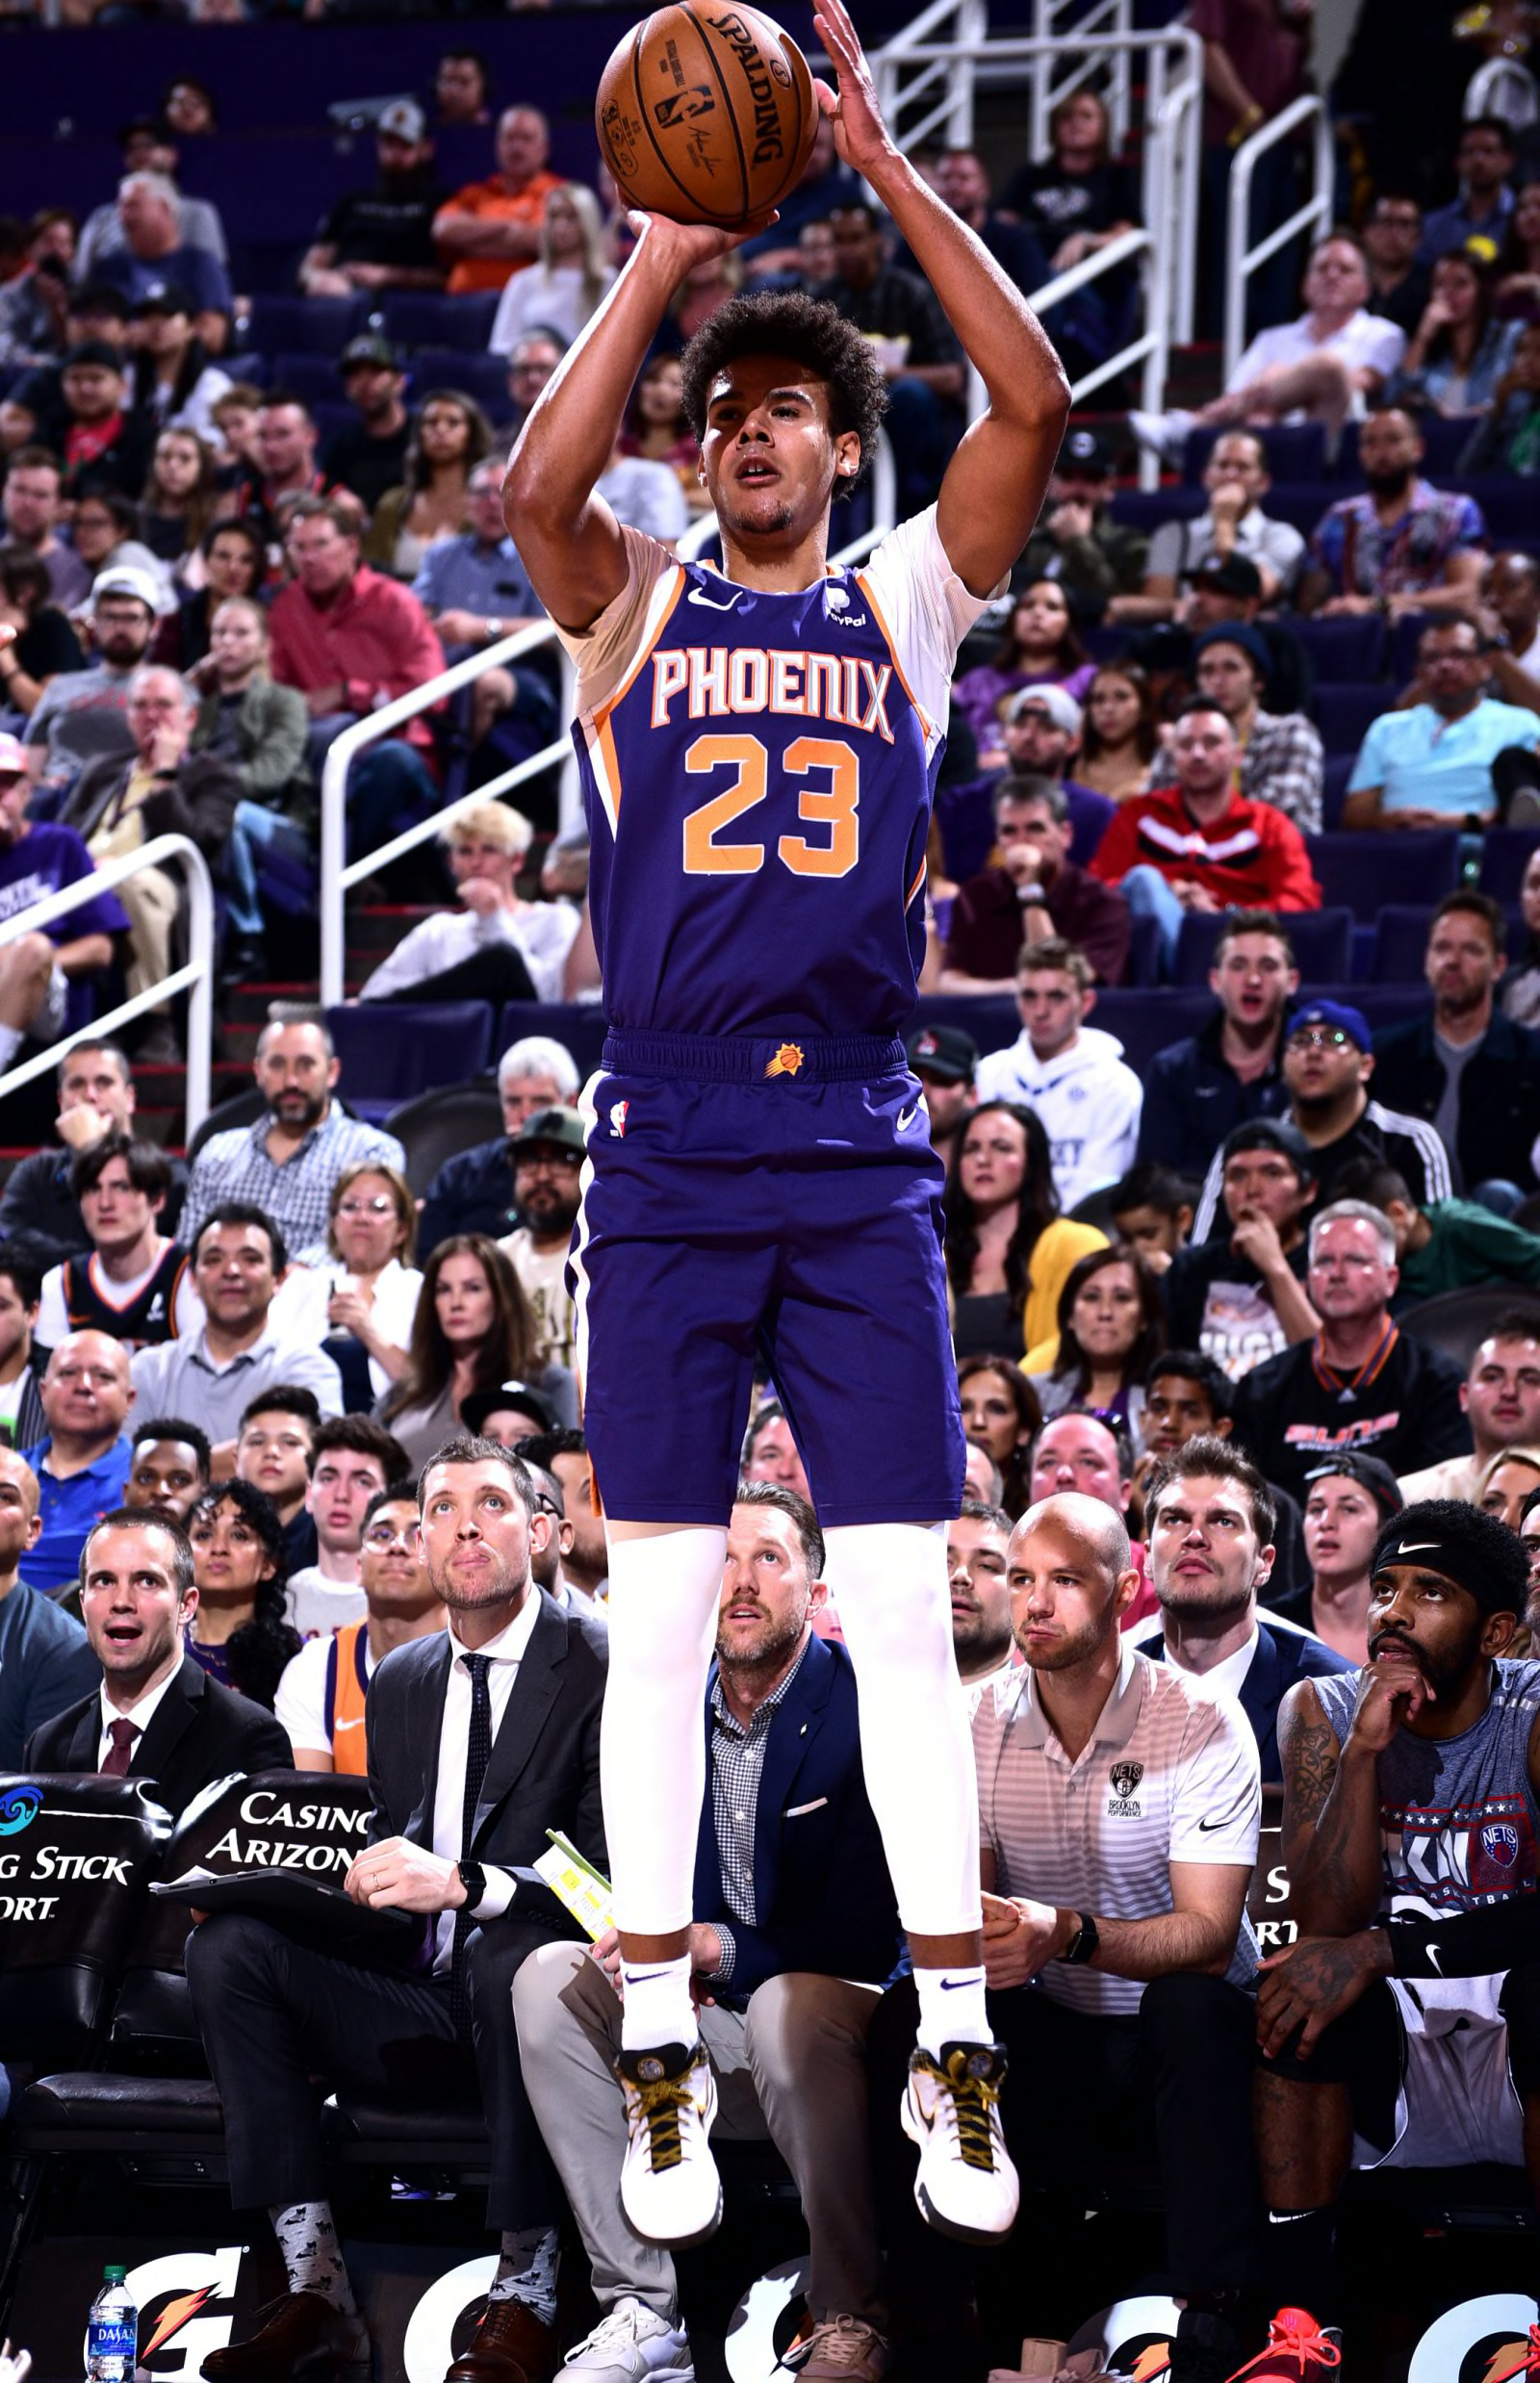 Why they are winning: The Phoenix Suns are a good 3-point ...